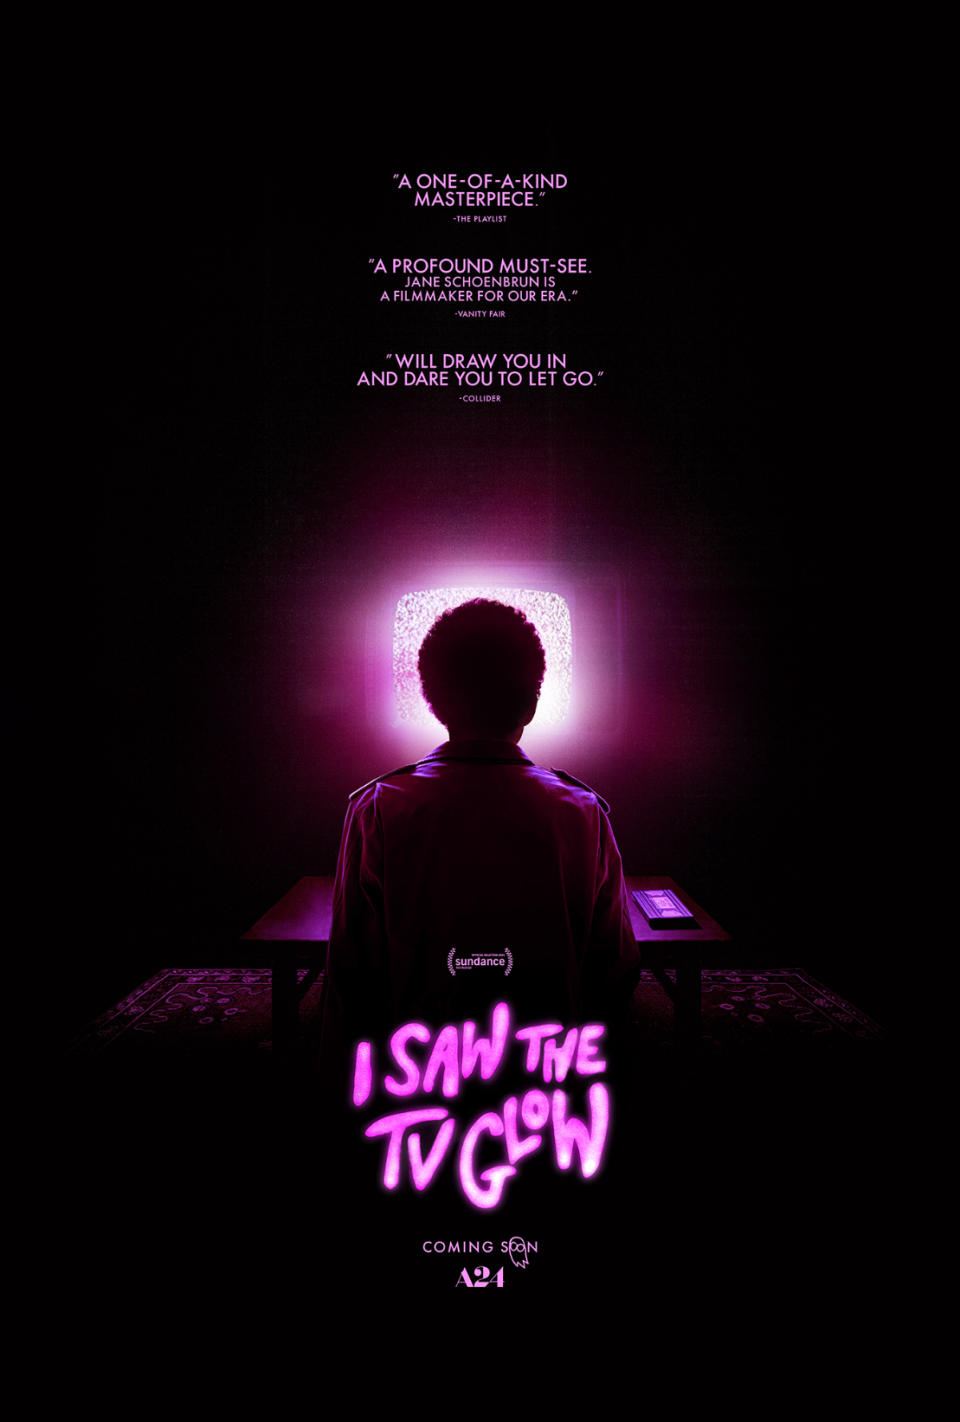 Movie poster featuring a silhouette of a person sitting, facing a glowing screen, with the title "I Saw The TV Glow"